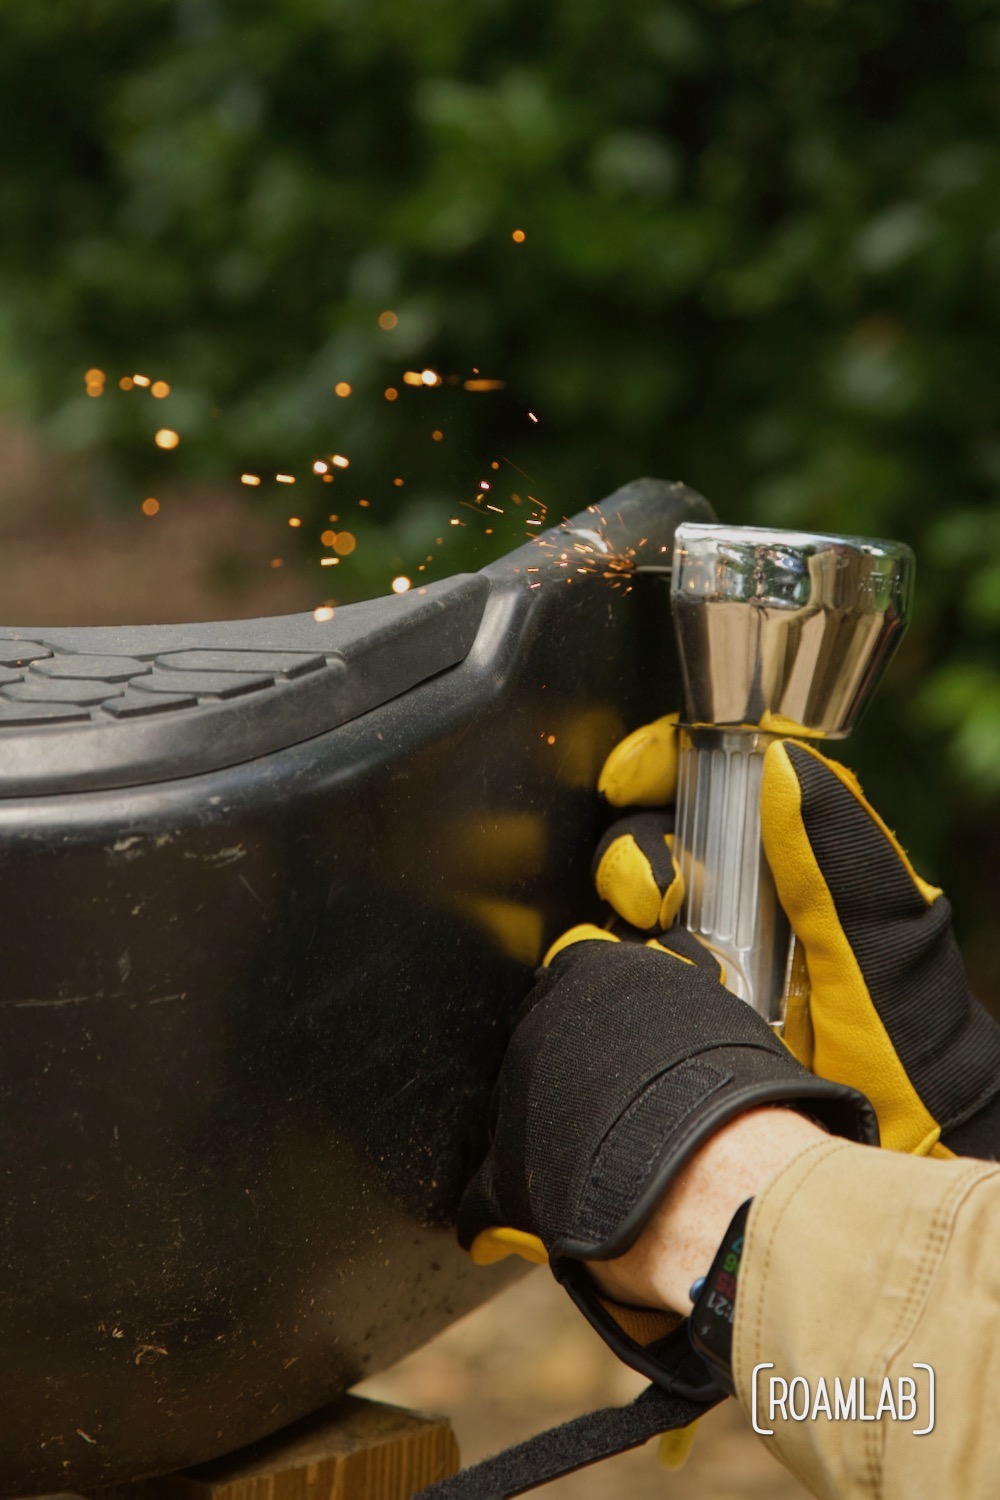 Close up of gloved hands using a cut-off tool to trim a truck bumper with bushes in the background.